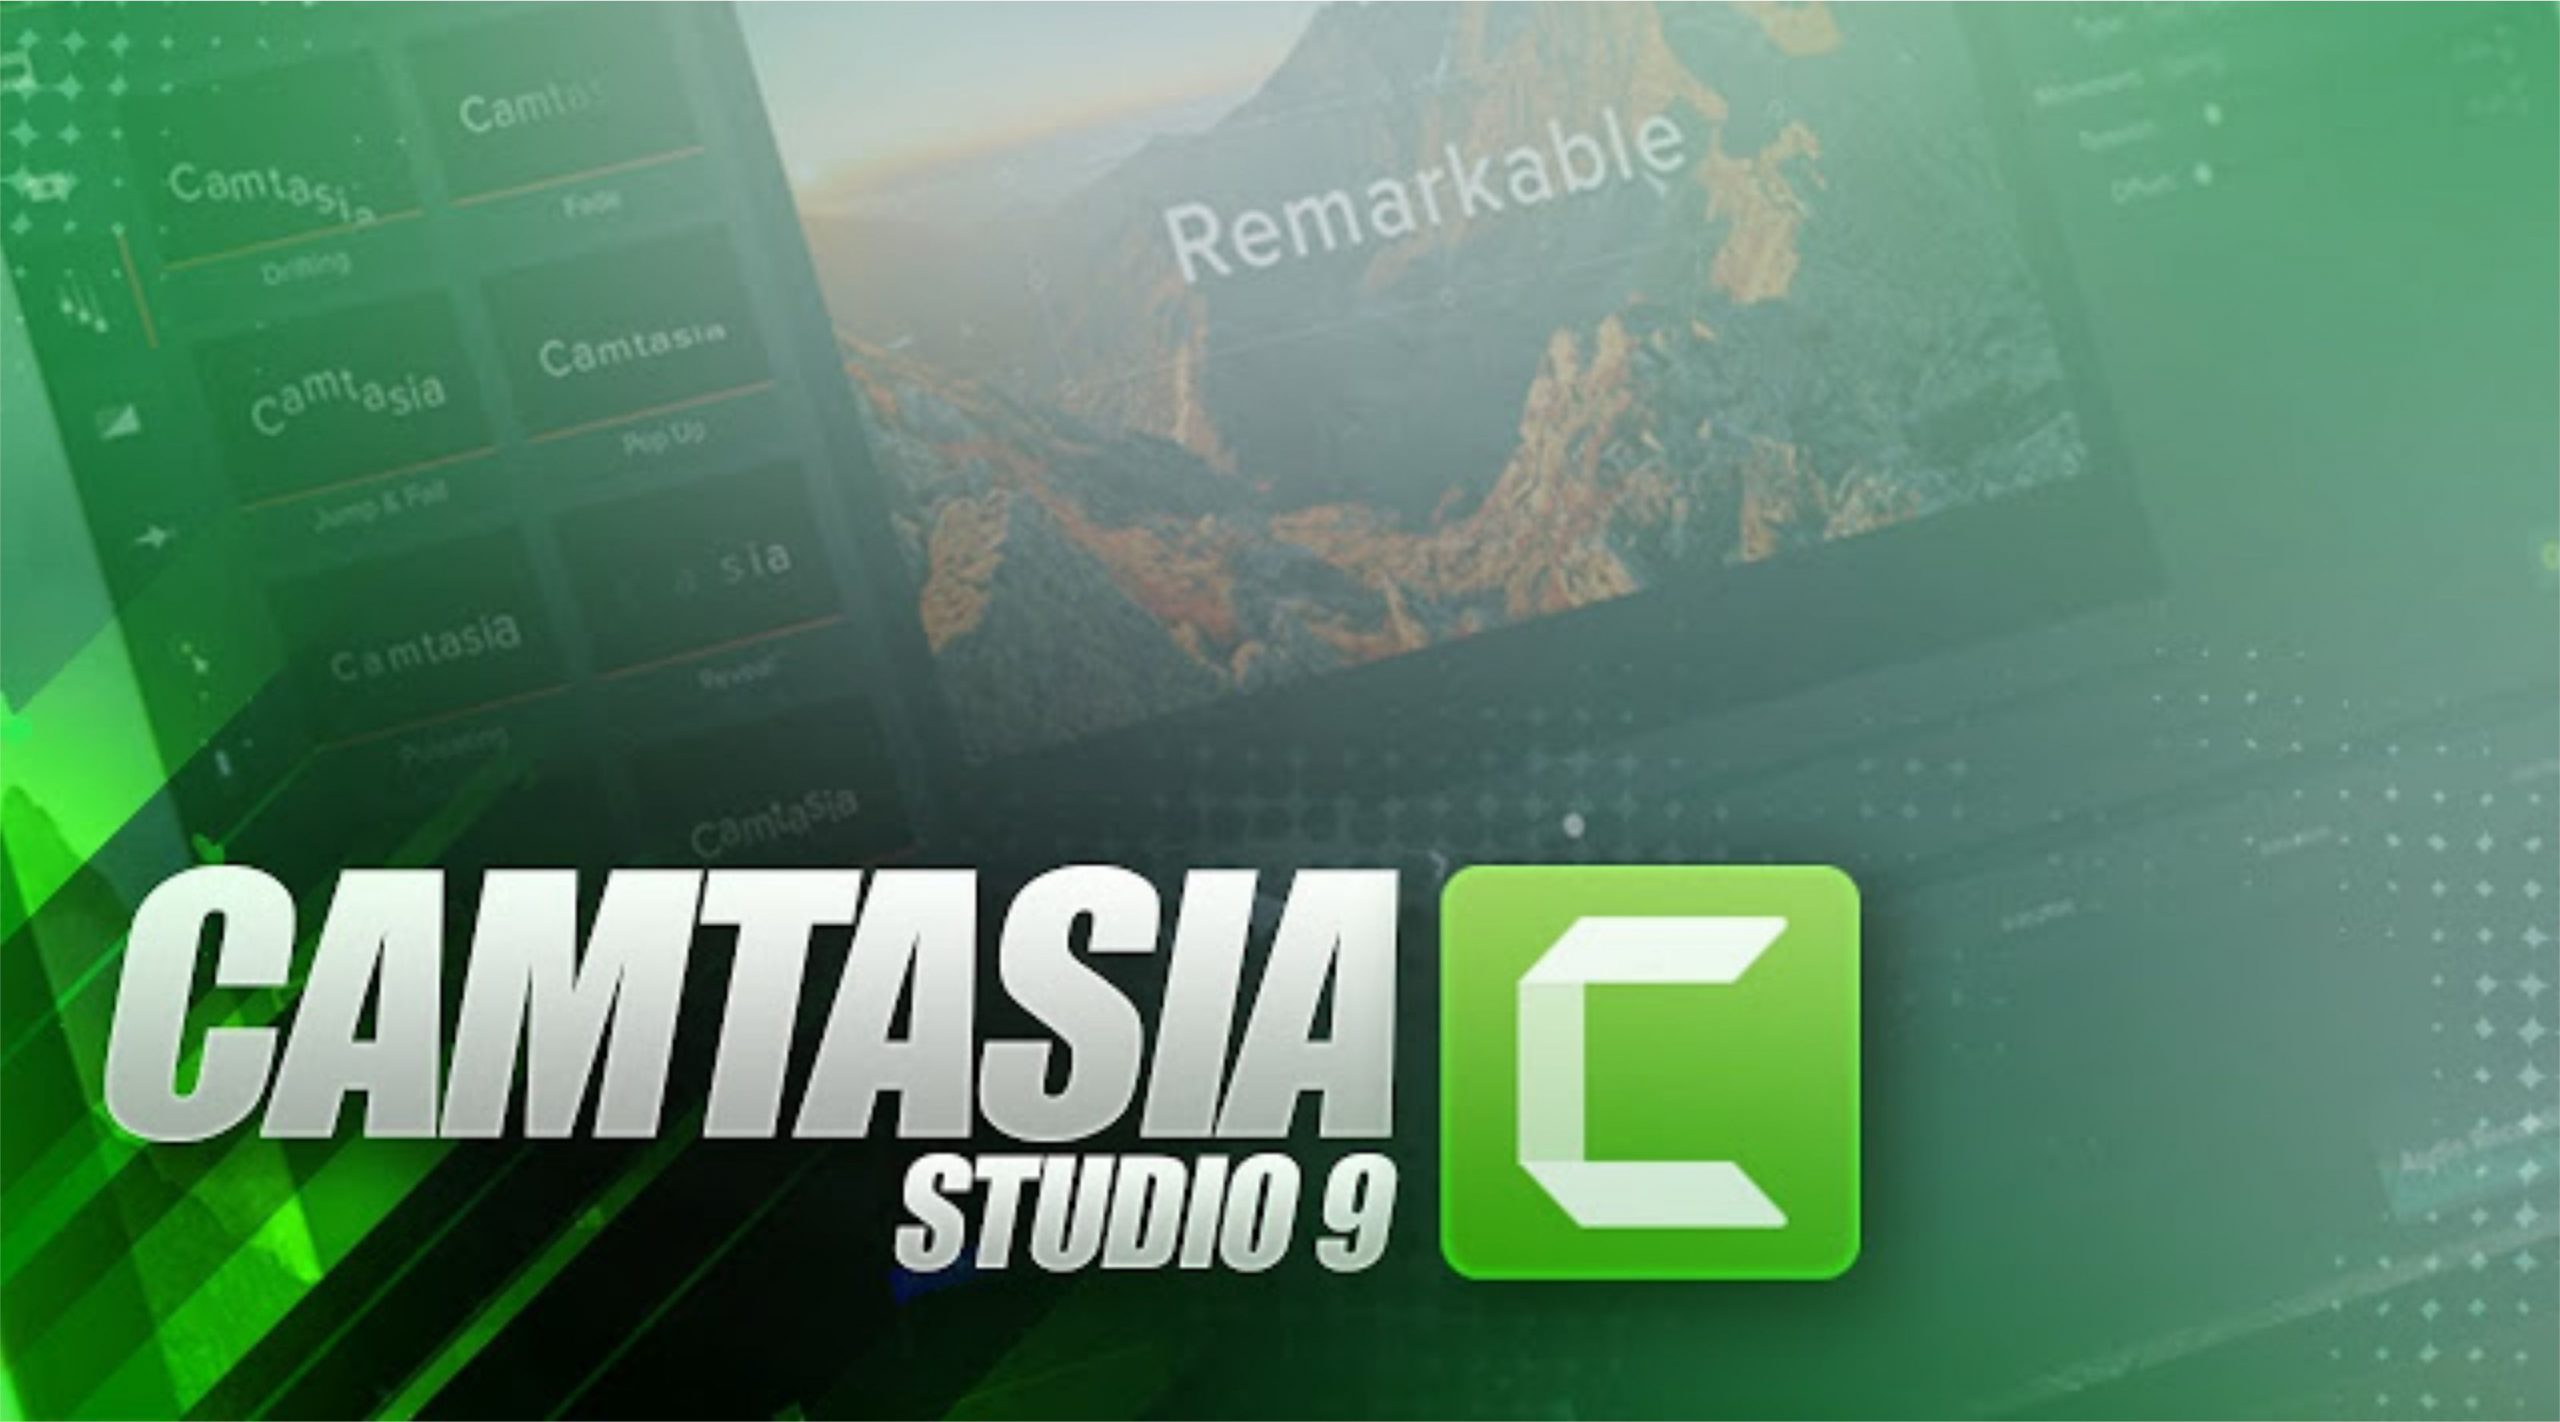 getting to know camtasia screen recorder and video editor